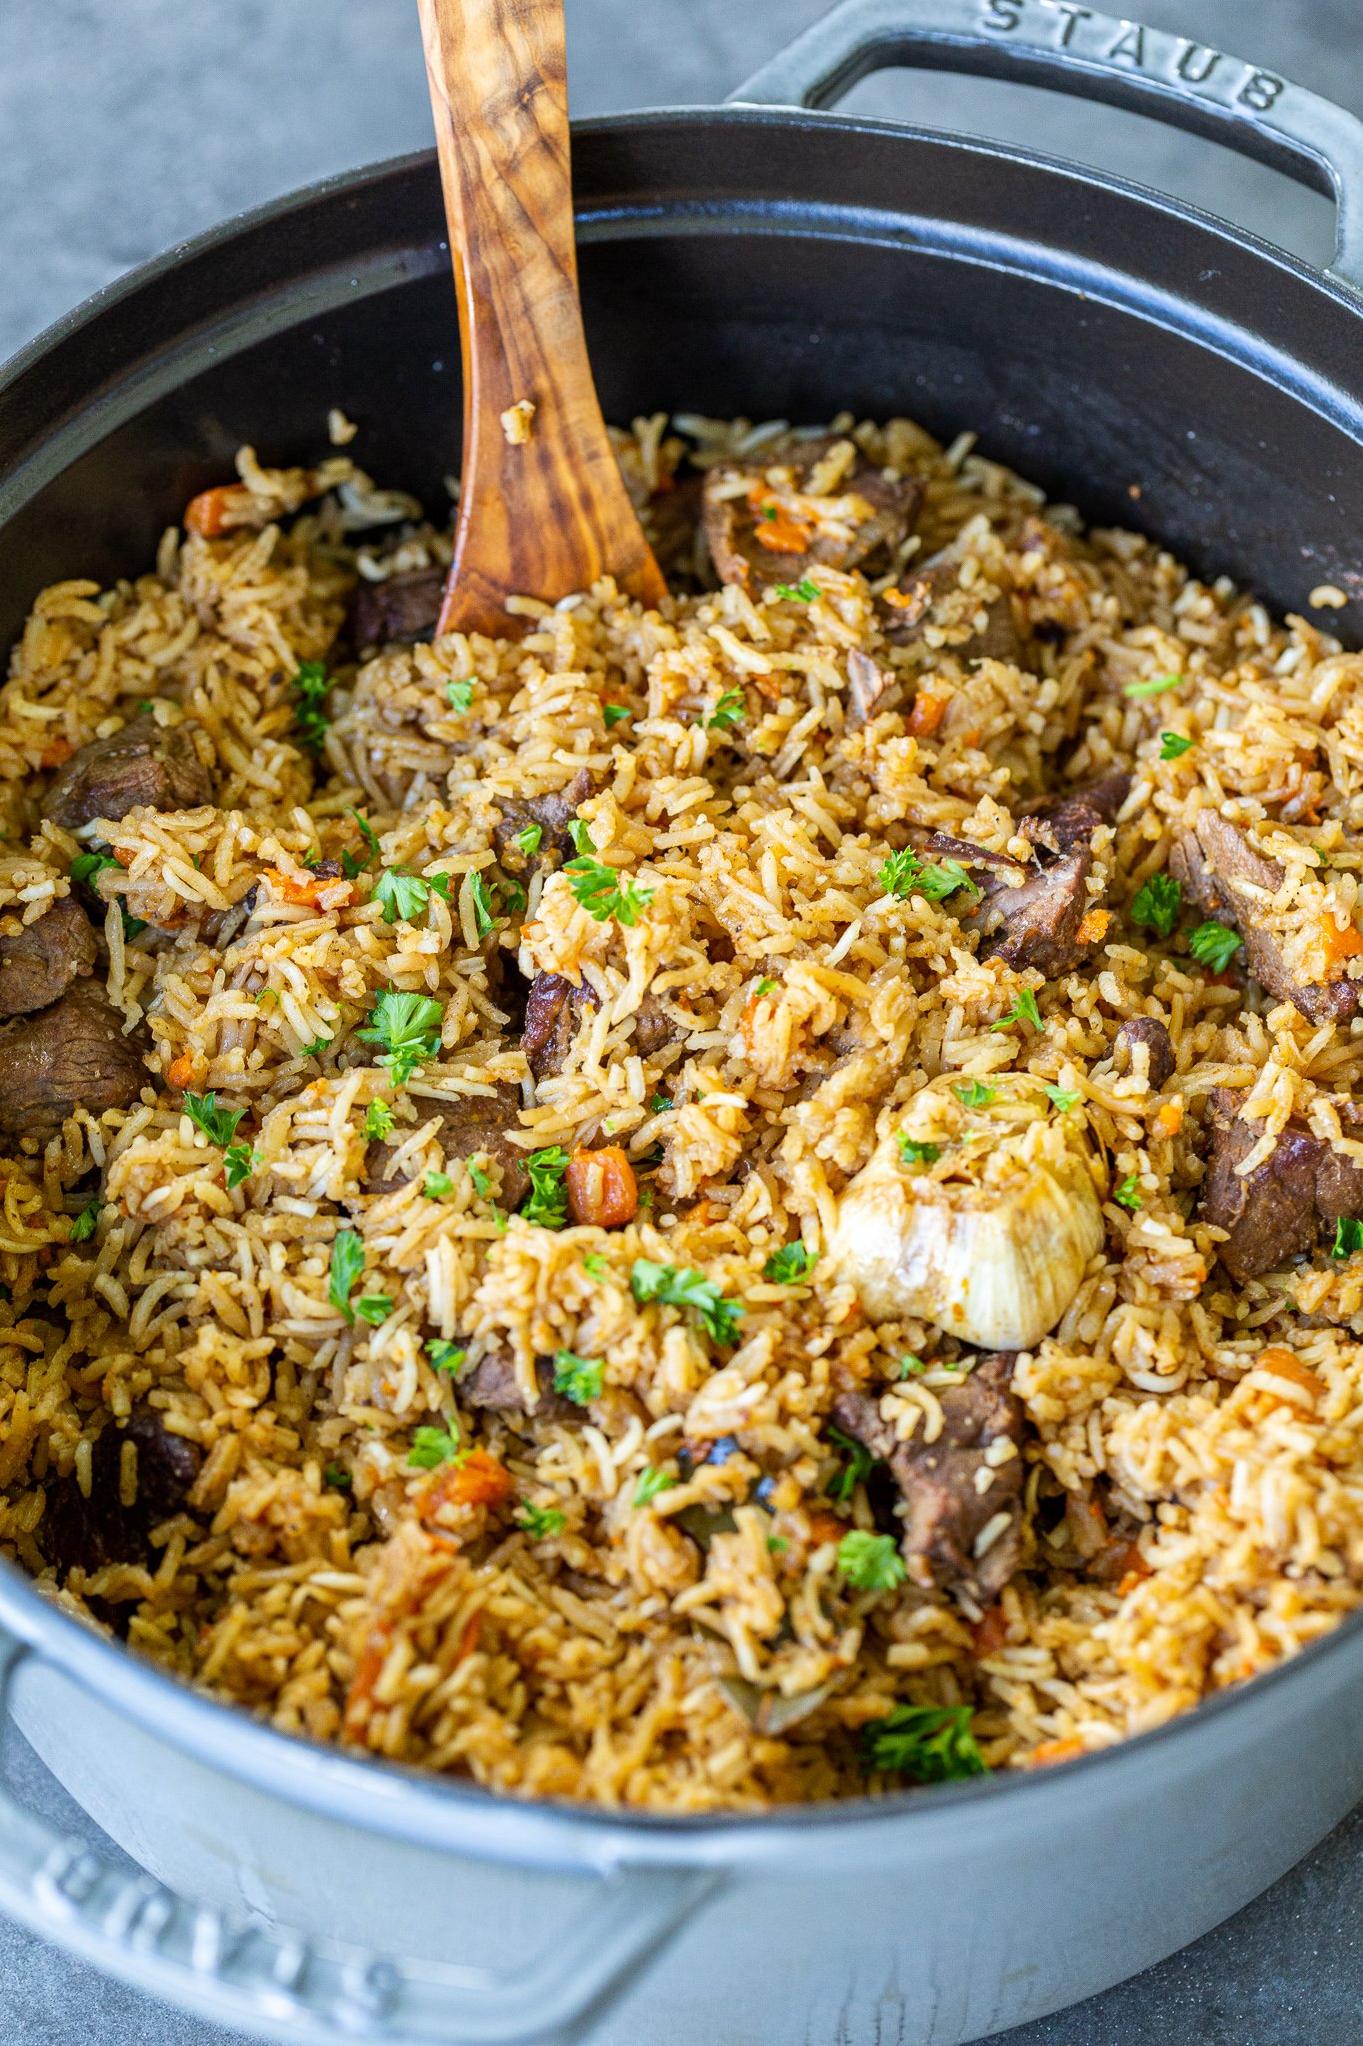  A mouth-watering view of the colorful Uzbek pilaf with lamb